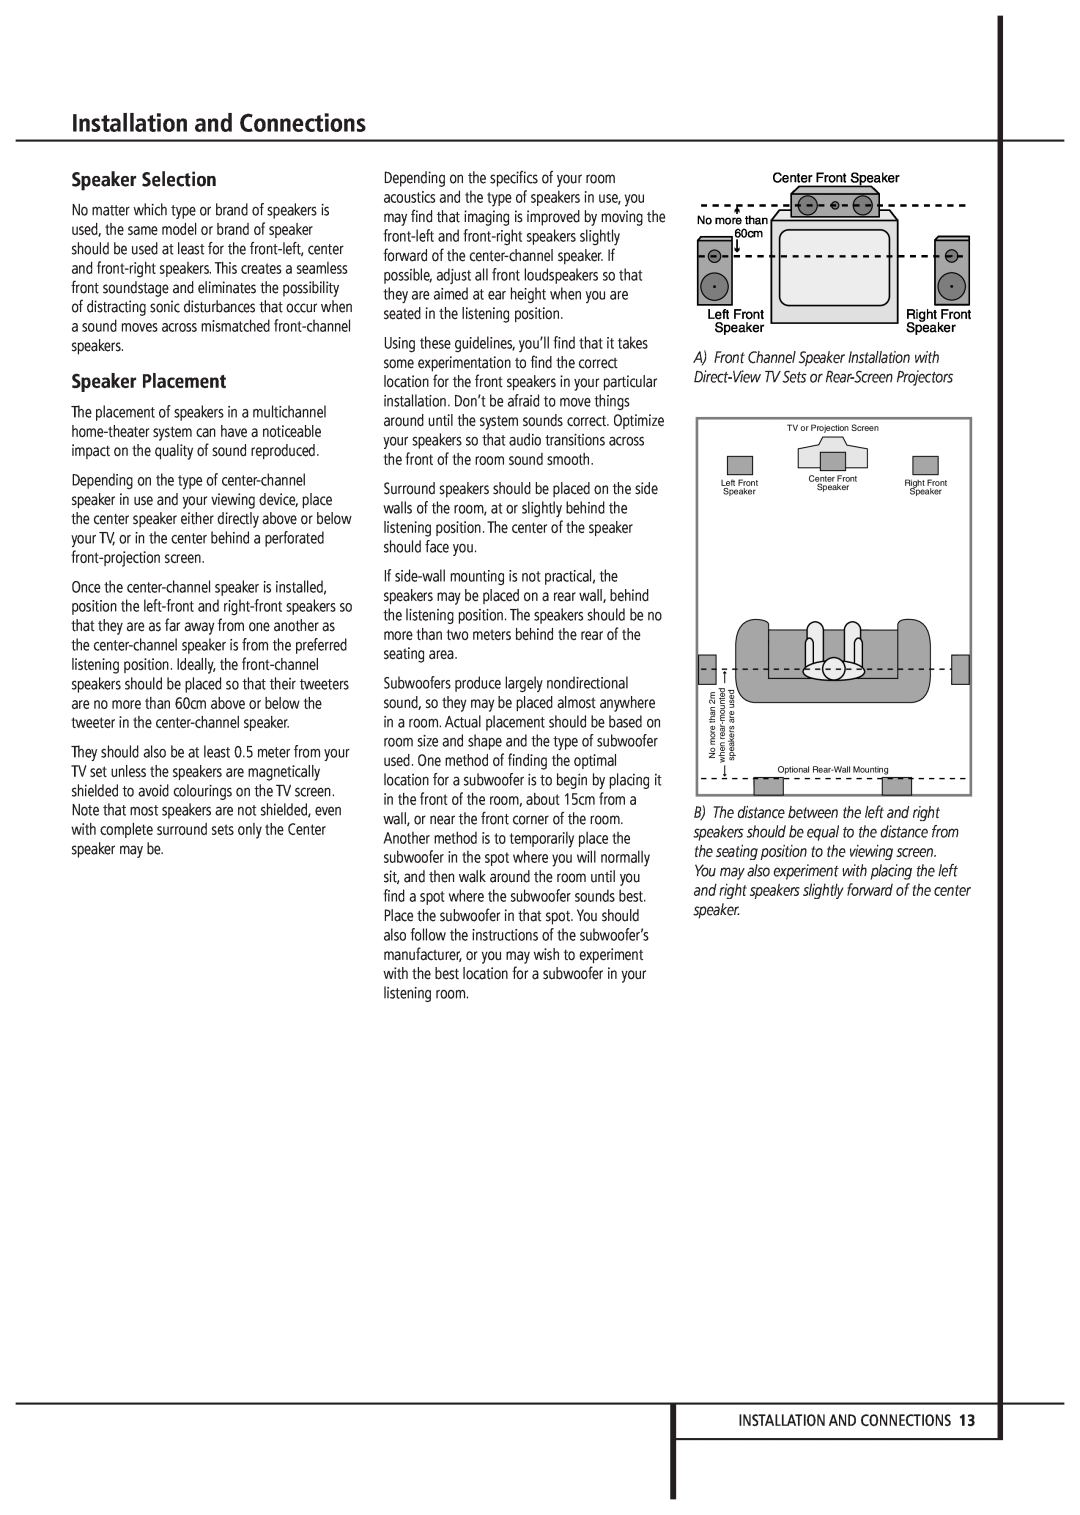 Harman-Kardon AVR1550 owner manual Speaker Selection, Speaker Placement, Installation and Connections 